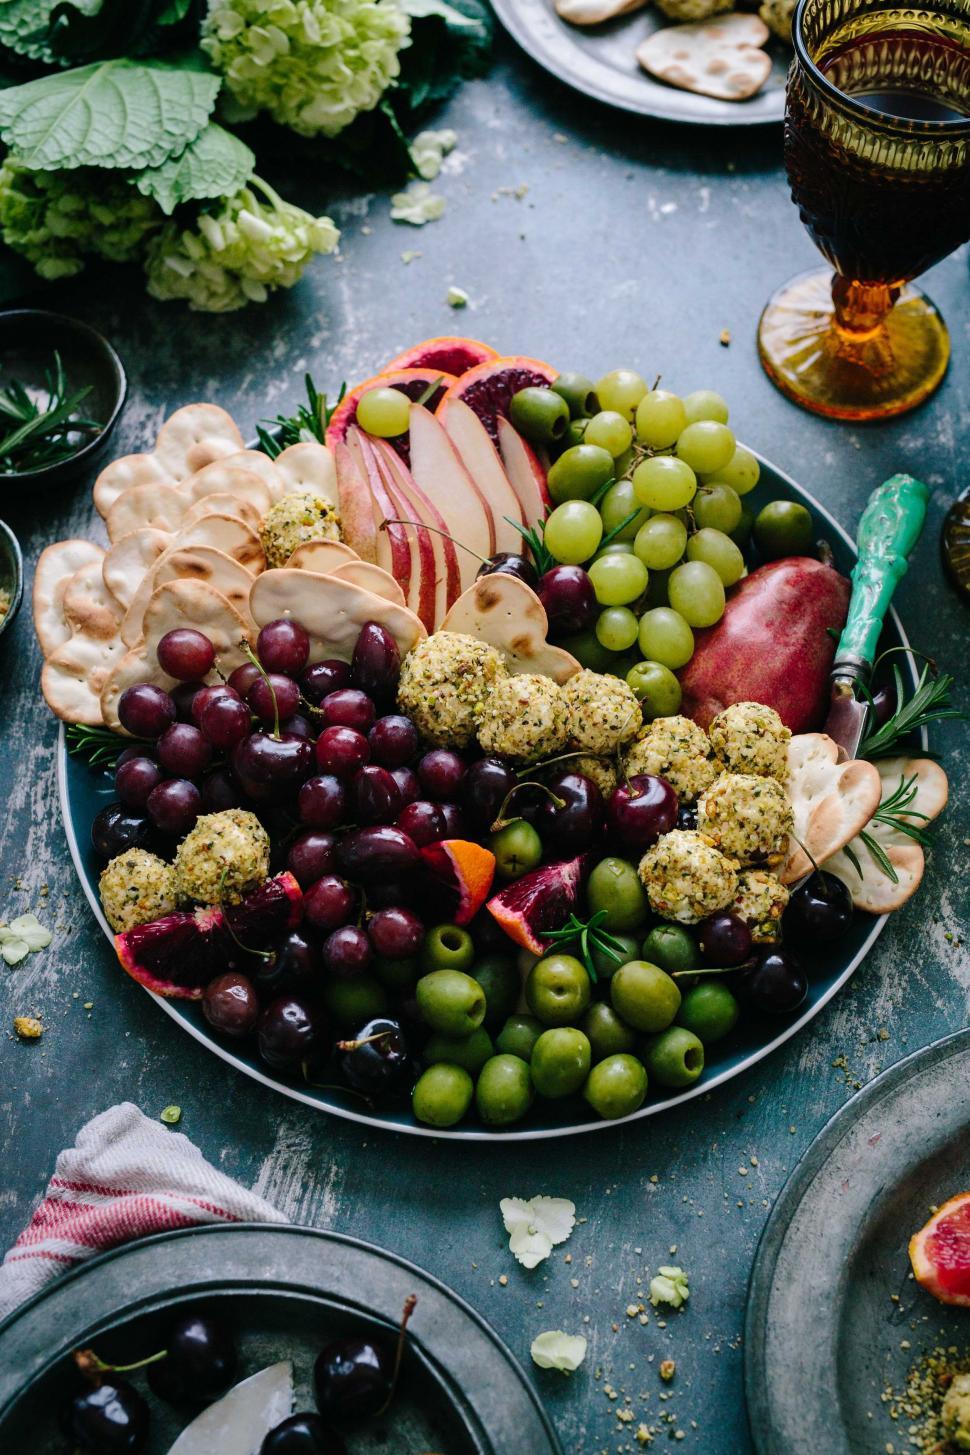 Free Image of Platter of Grapes, Apples, Cheese, and Crackers 